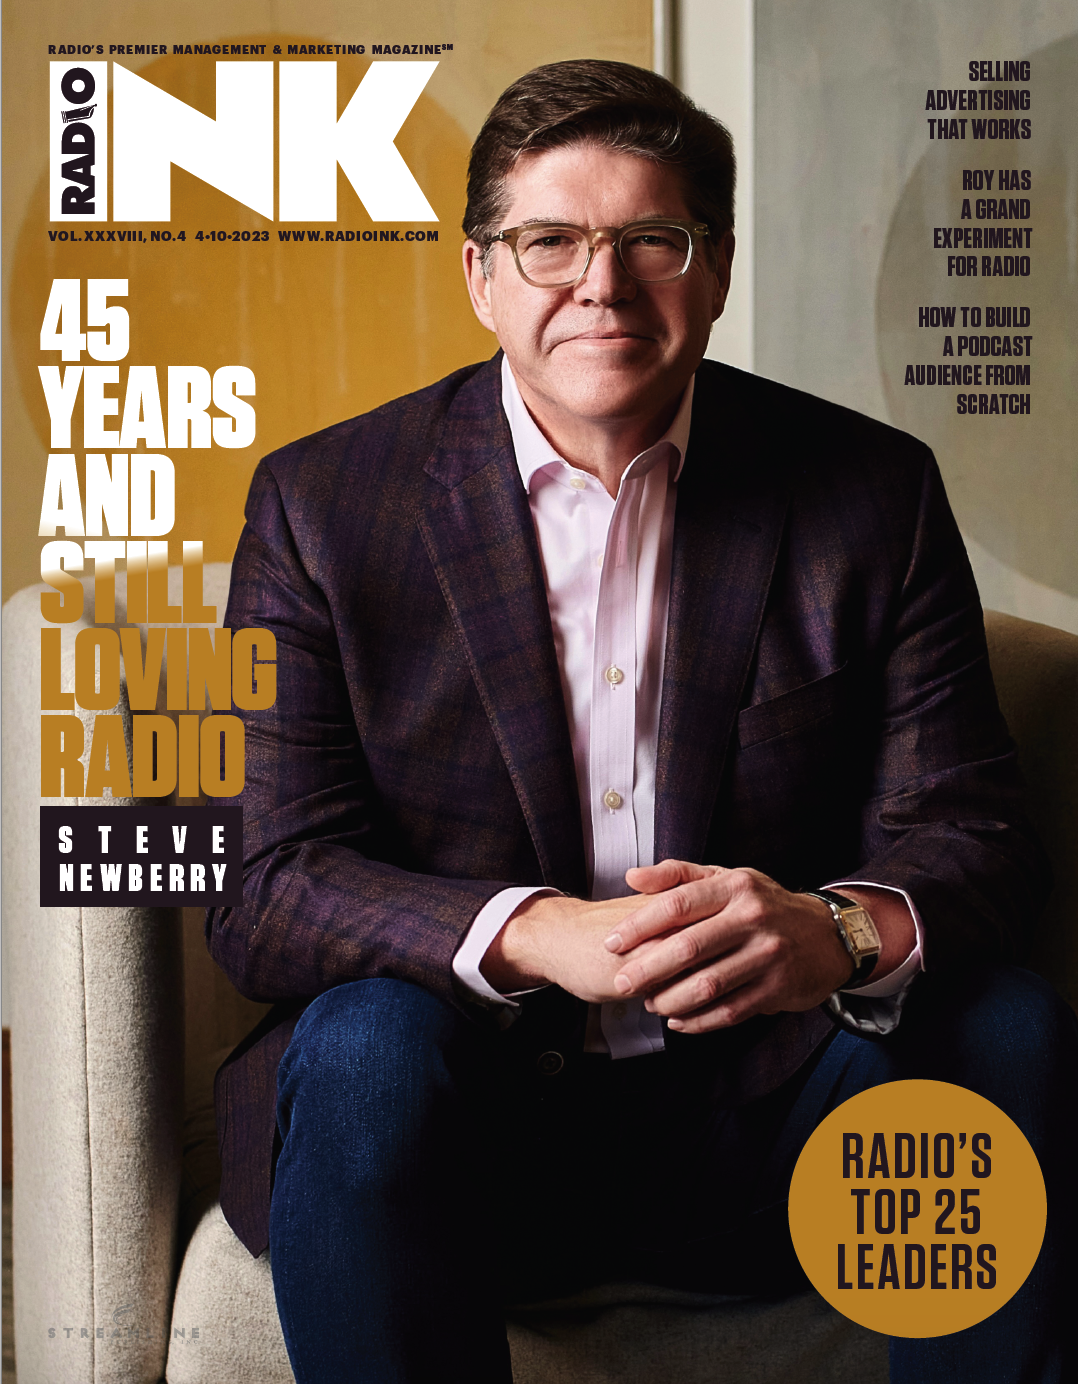 Cover 4/10/23 issue of Radio Ink, with Steve Newberry